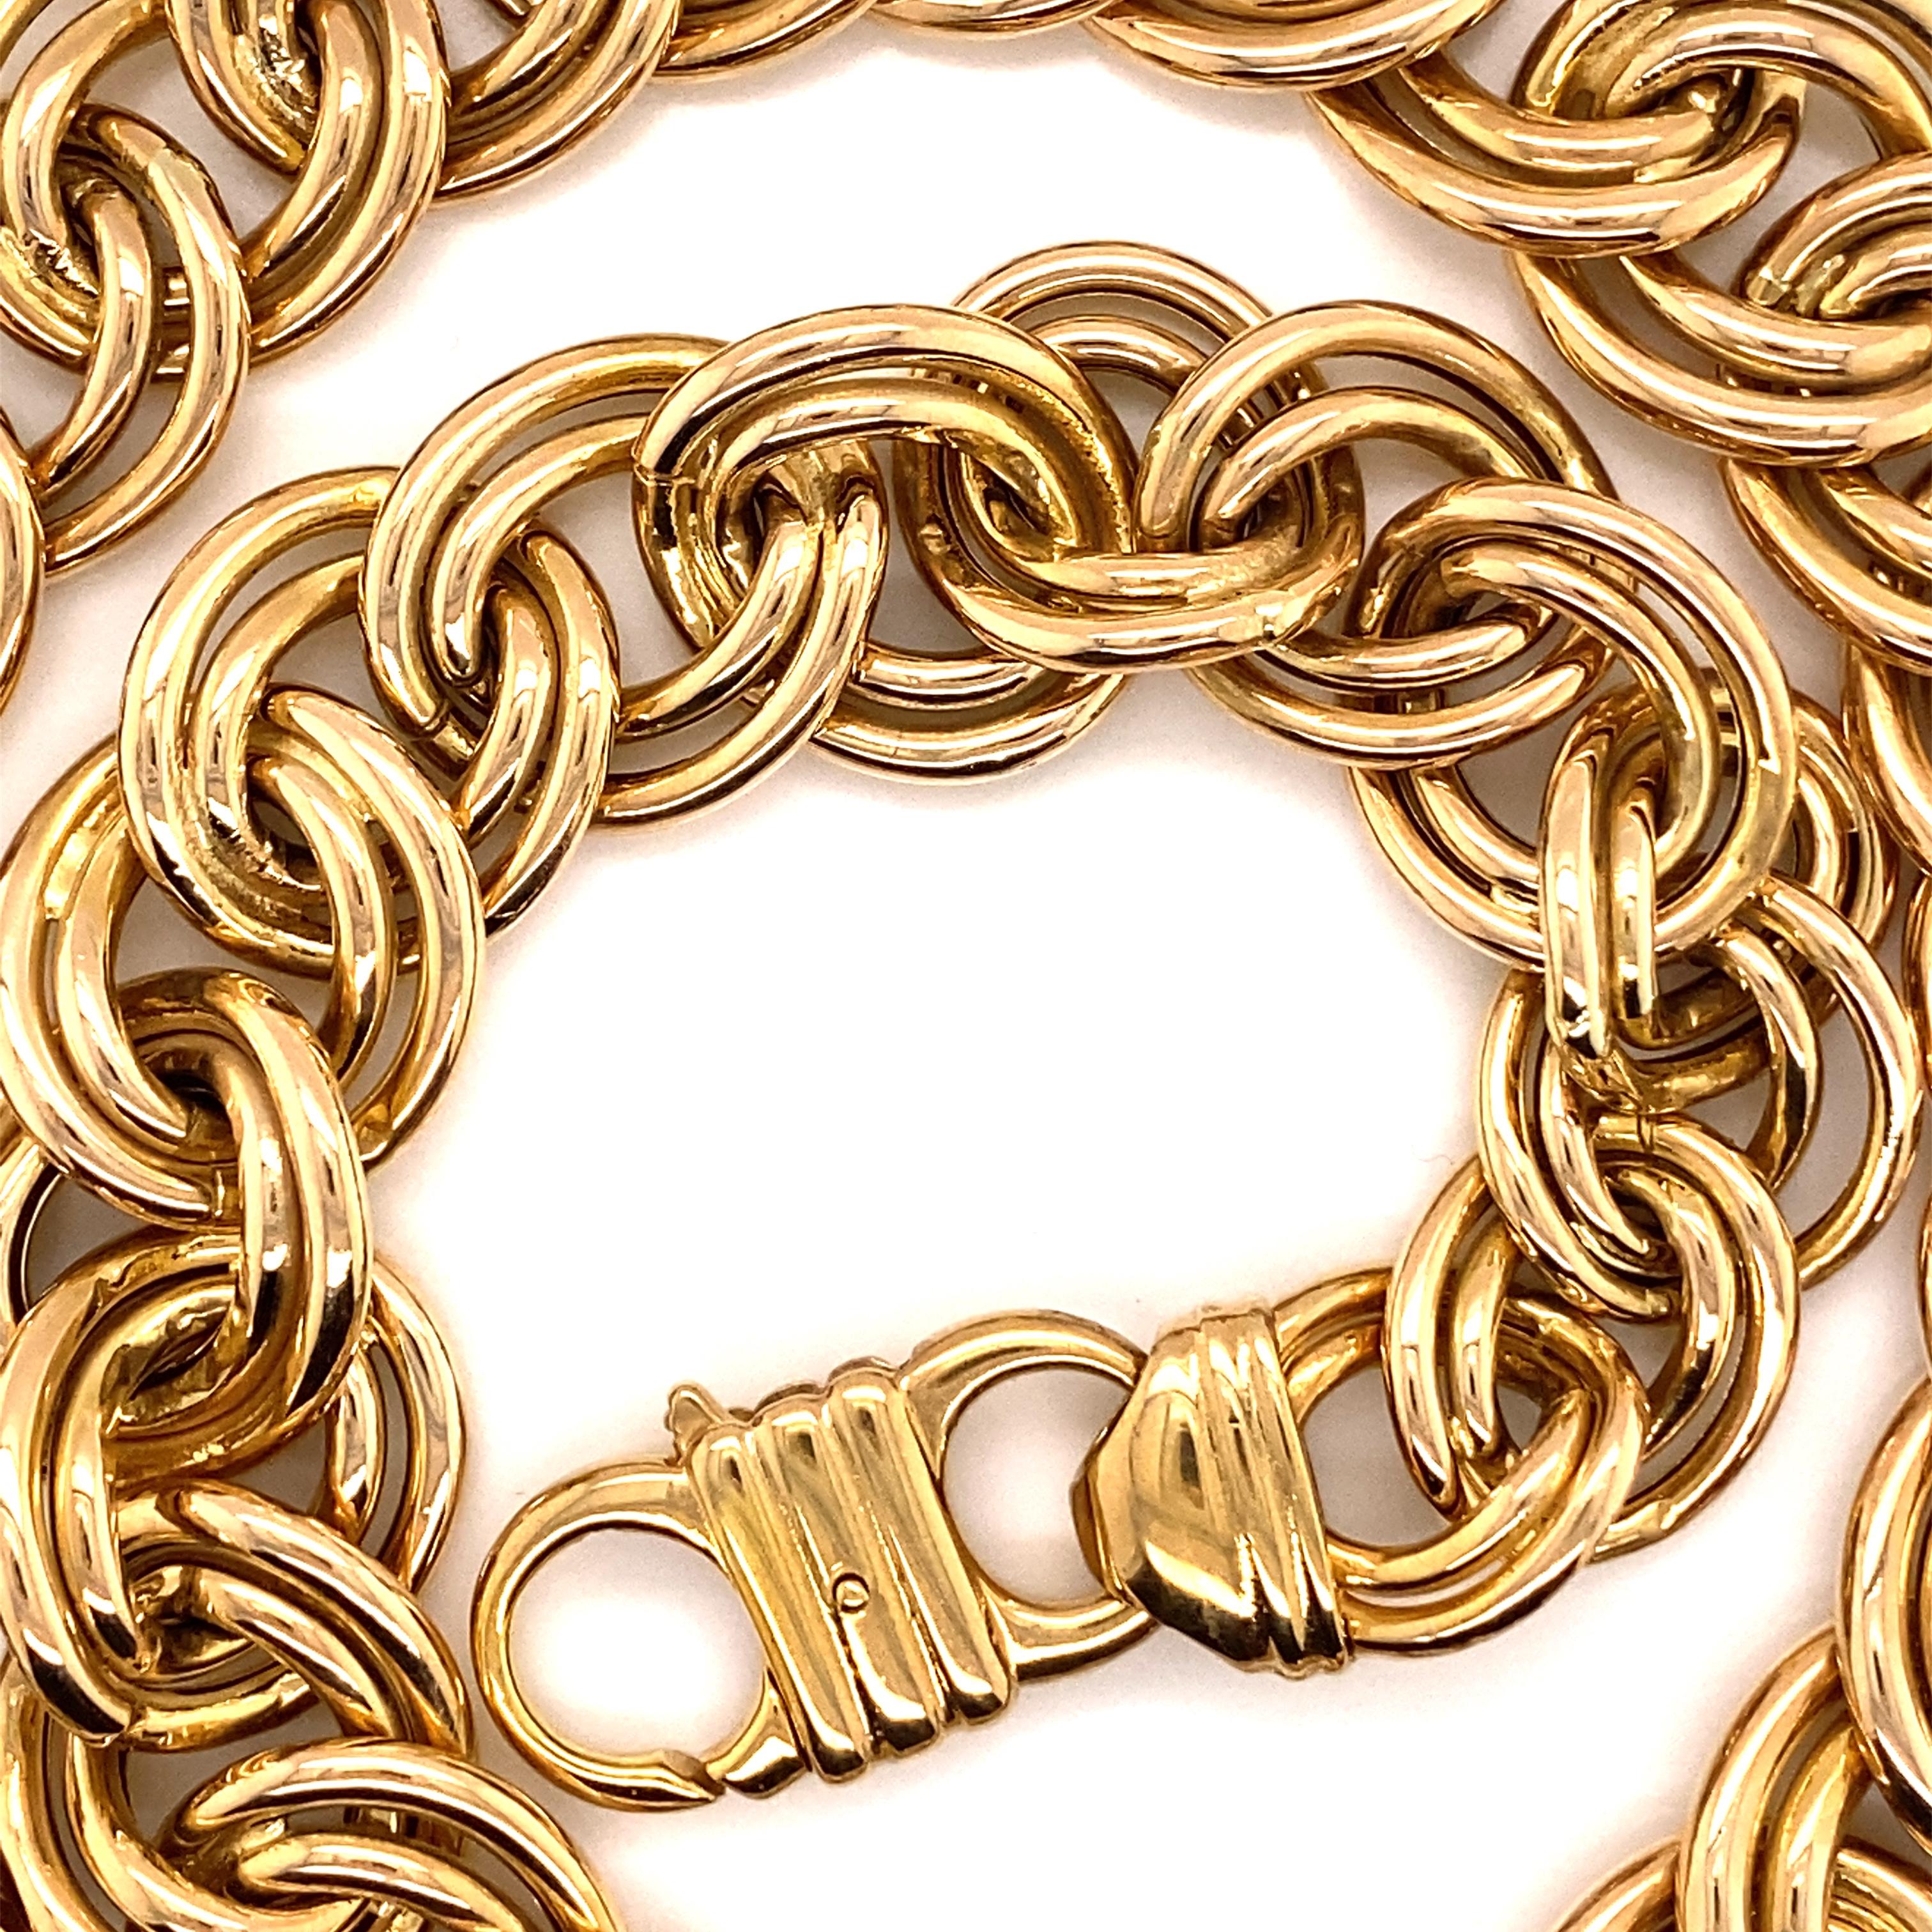 1980s gold chain